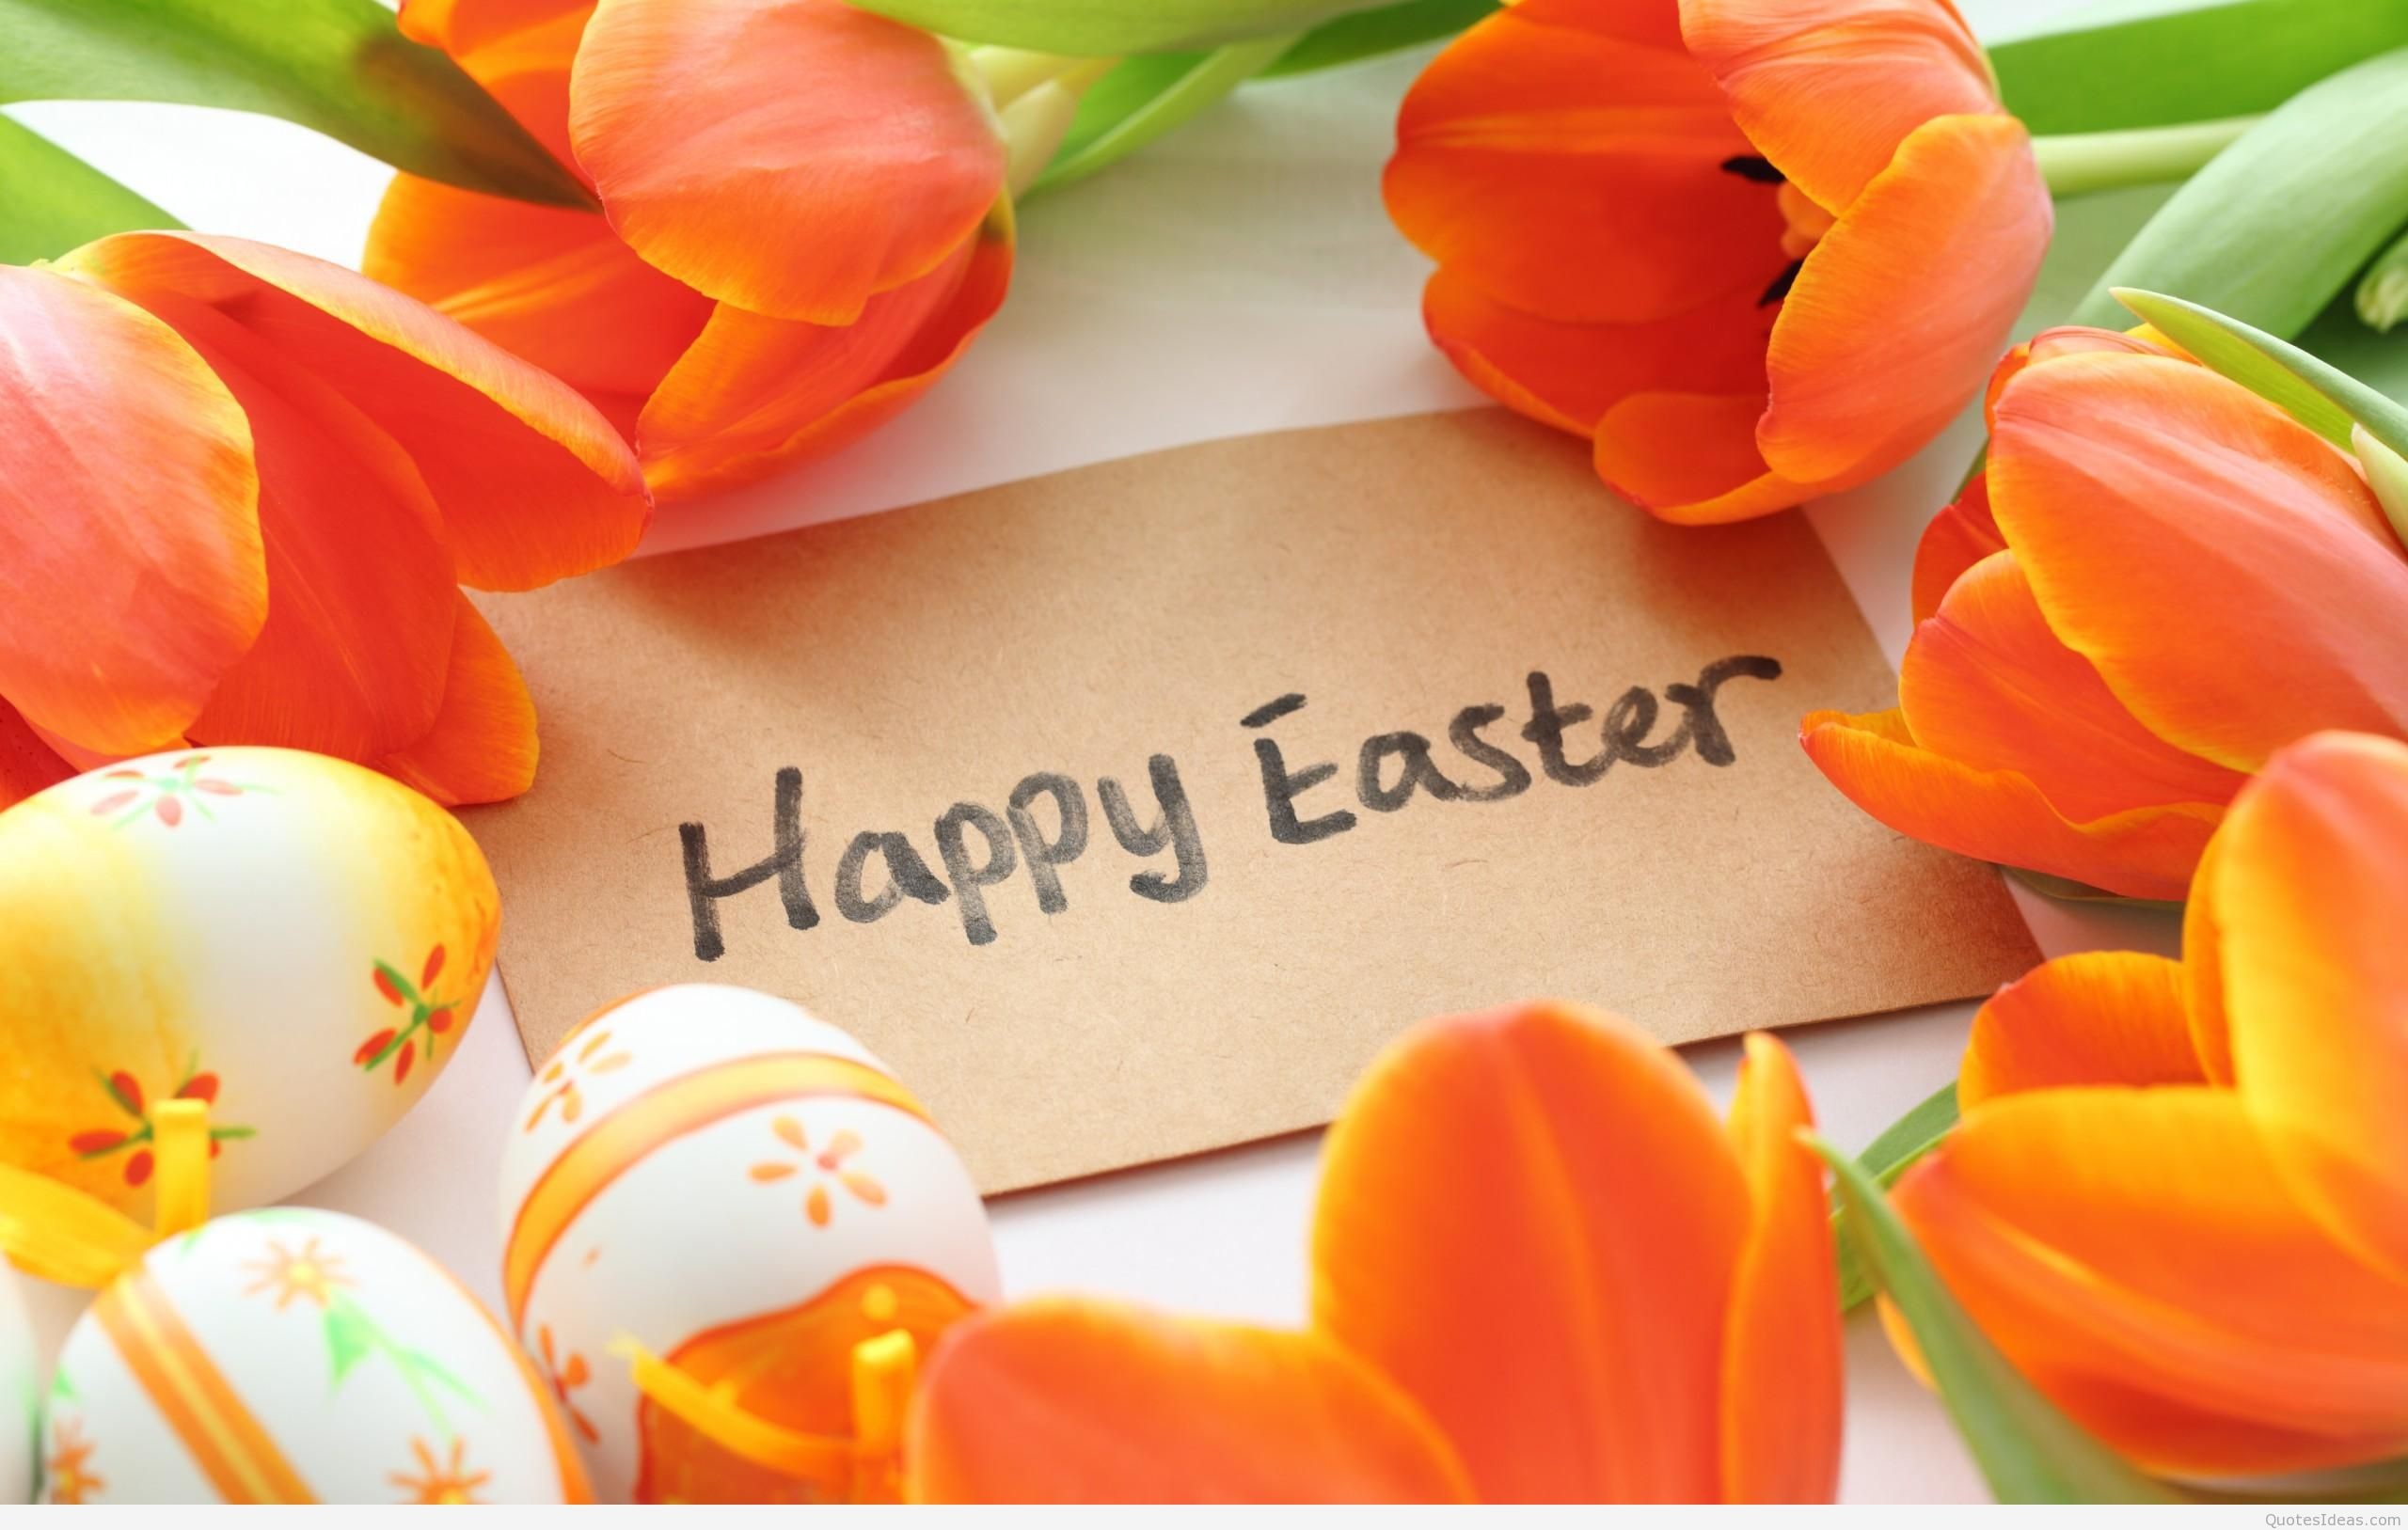 Happy Easter 324249 2015 Happy Easter Wallpapers Hd - Happy Easter Wishes 2019 - HD Wallpaper 